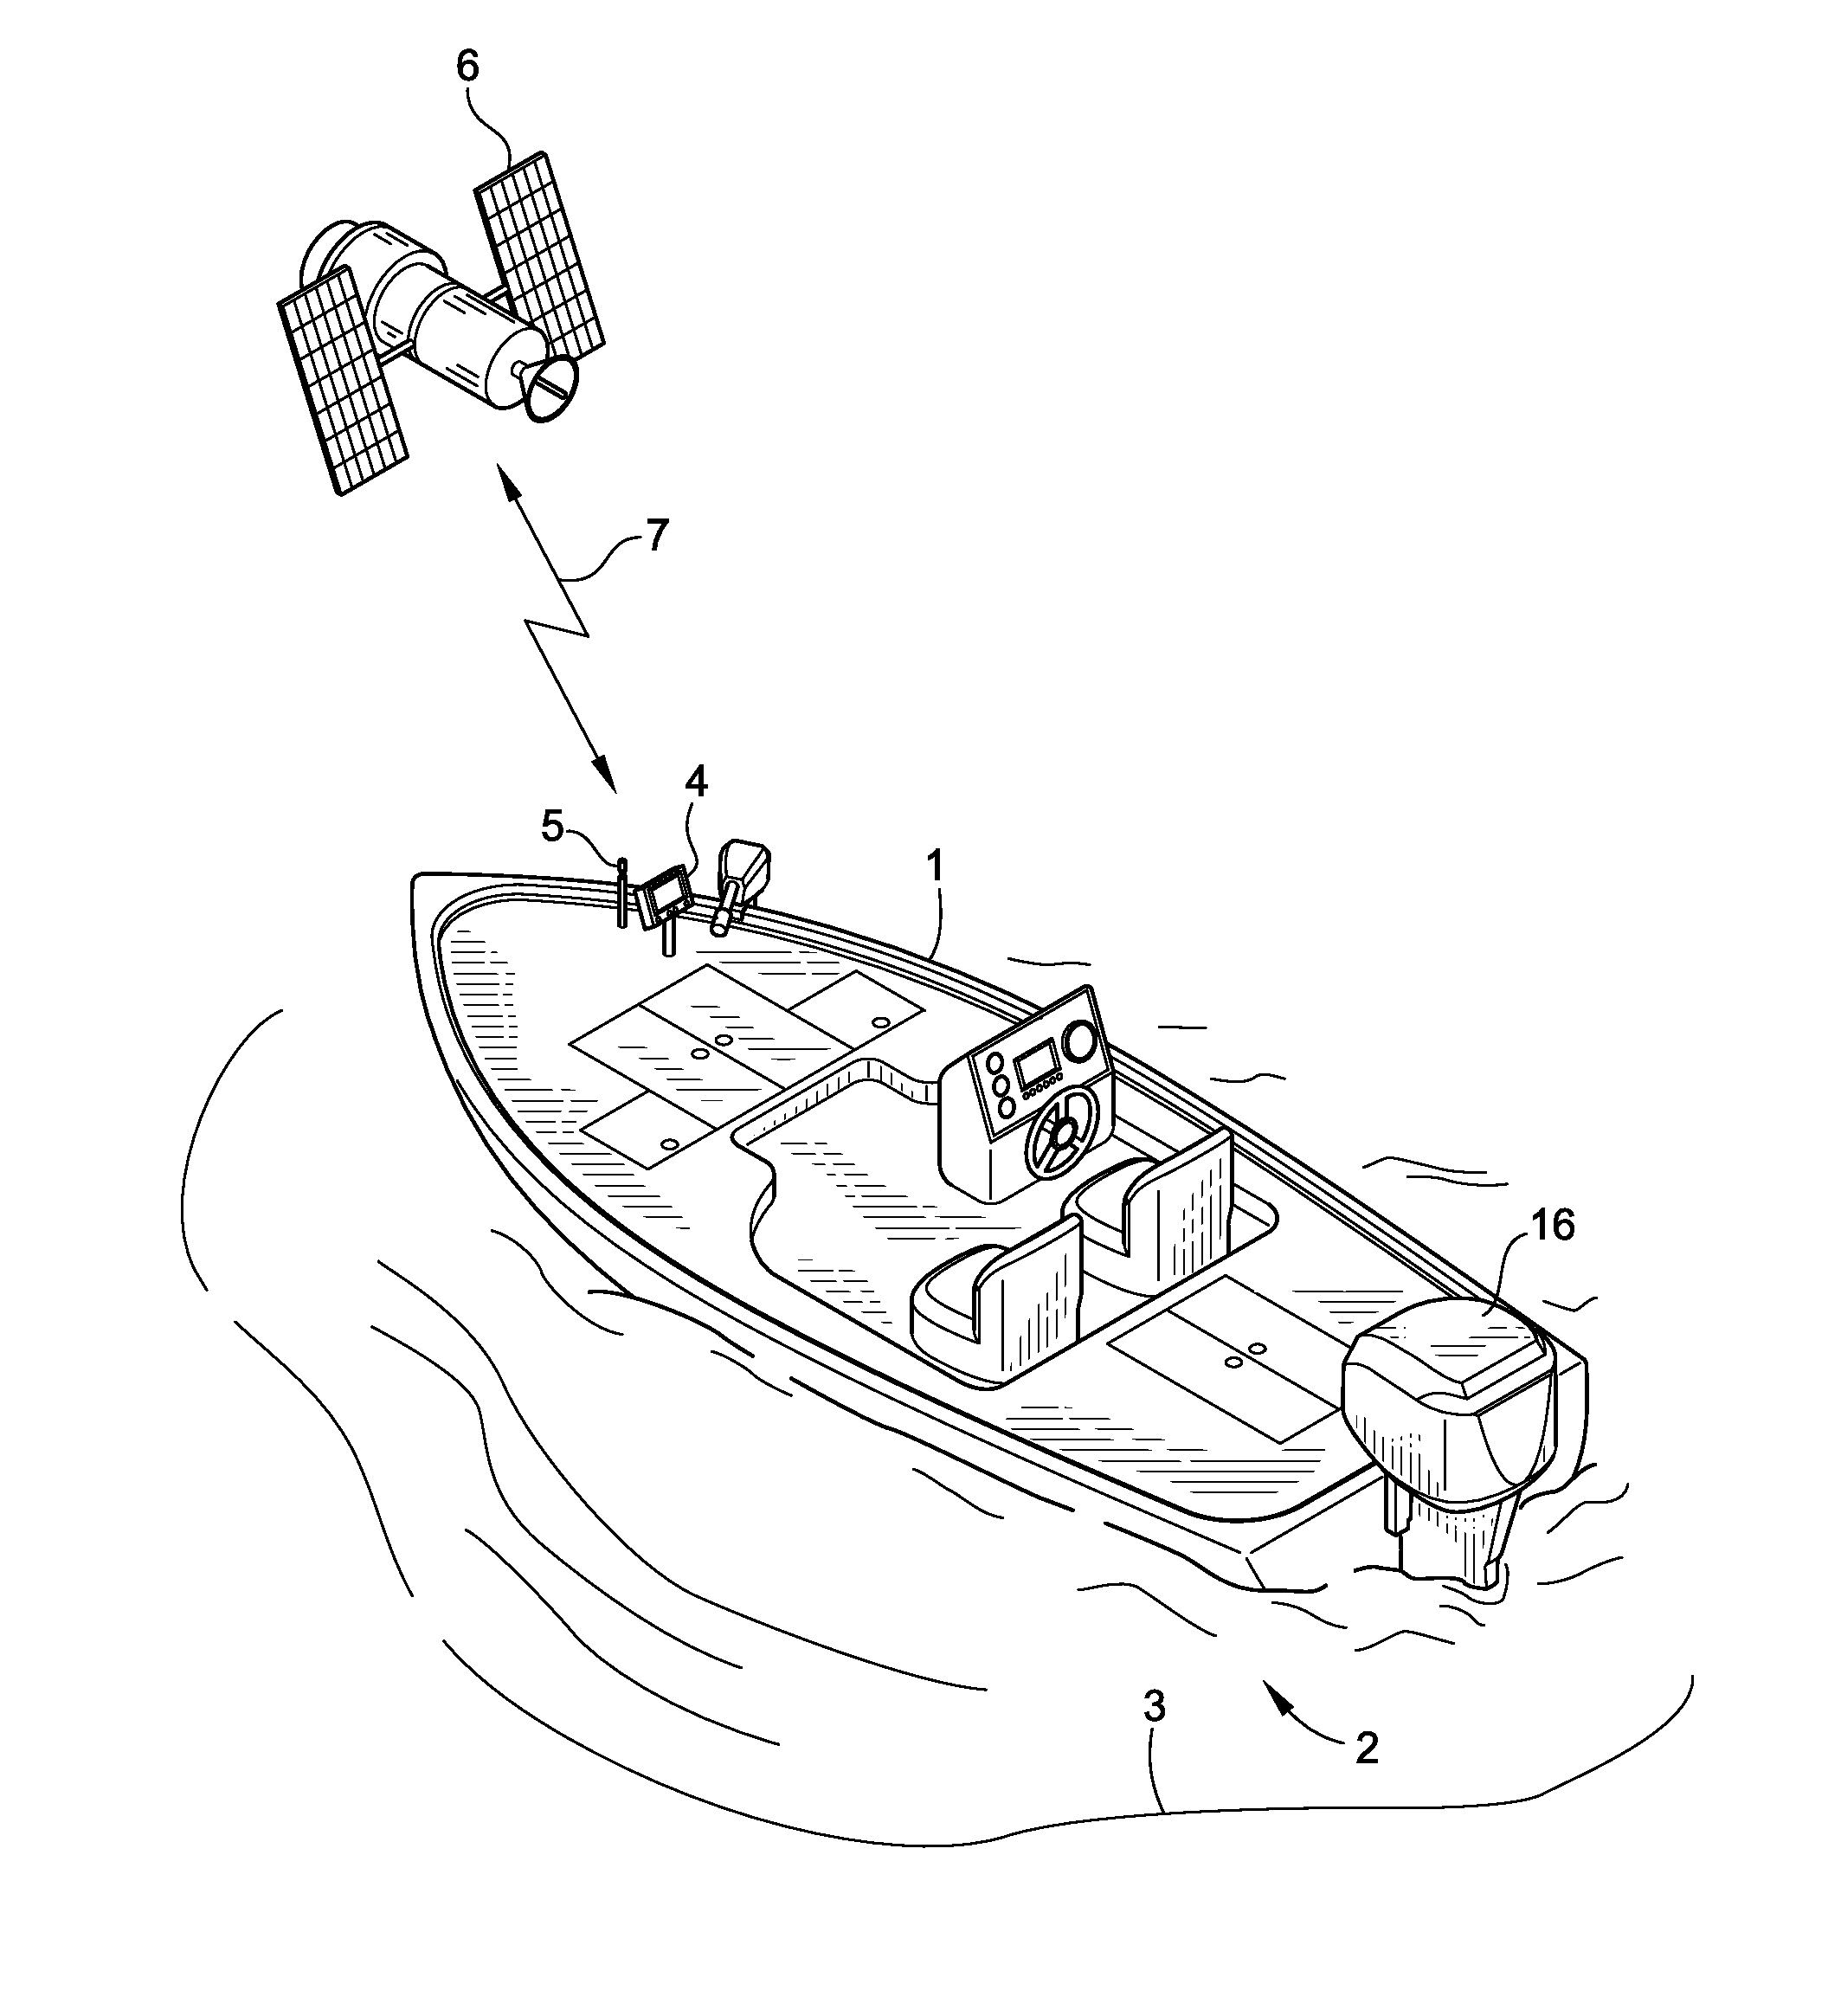 System and method for automatically navigating a depth contour